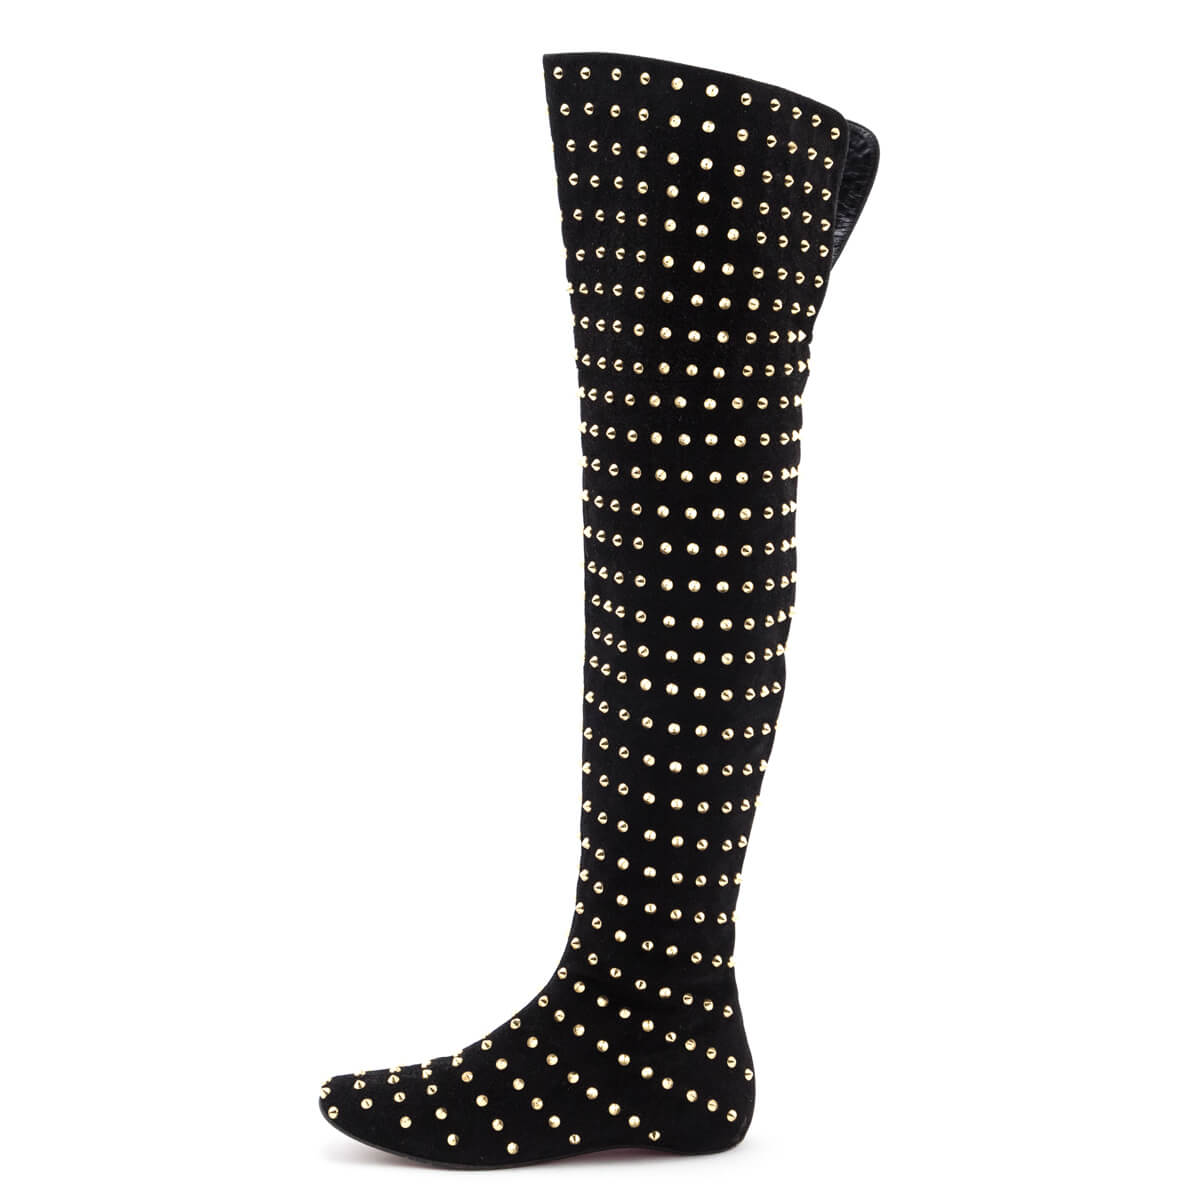 Christian Louboutin Suede Studded Accents Boots - ShopStyle